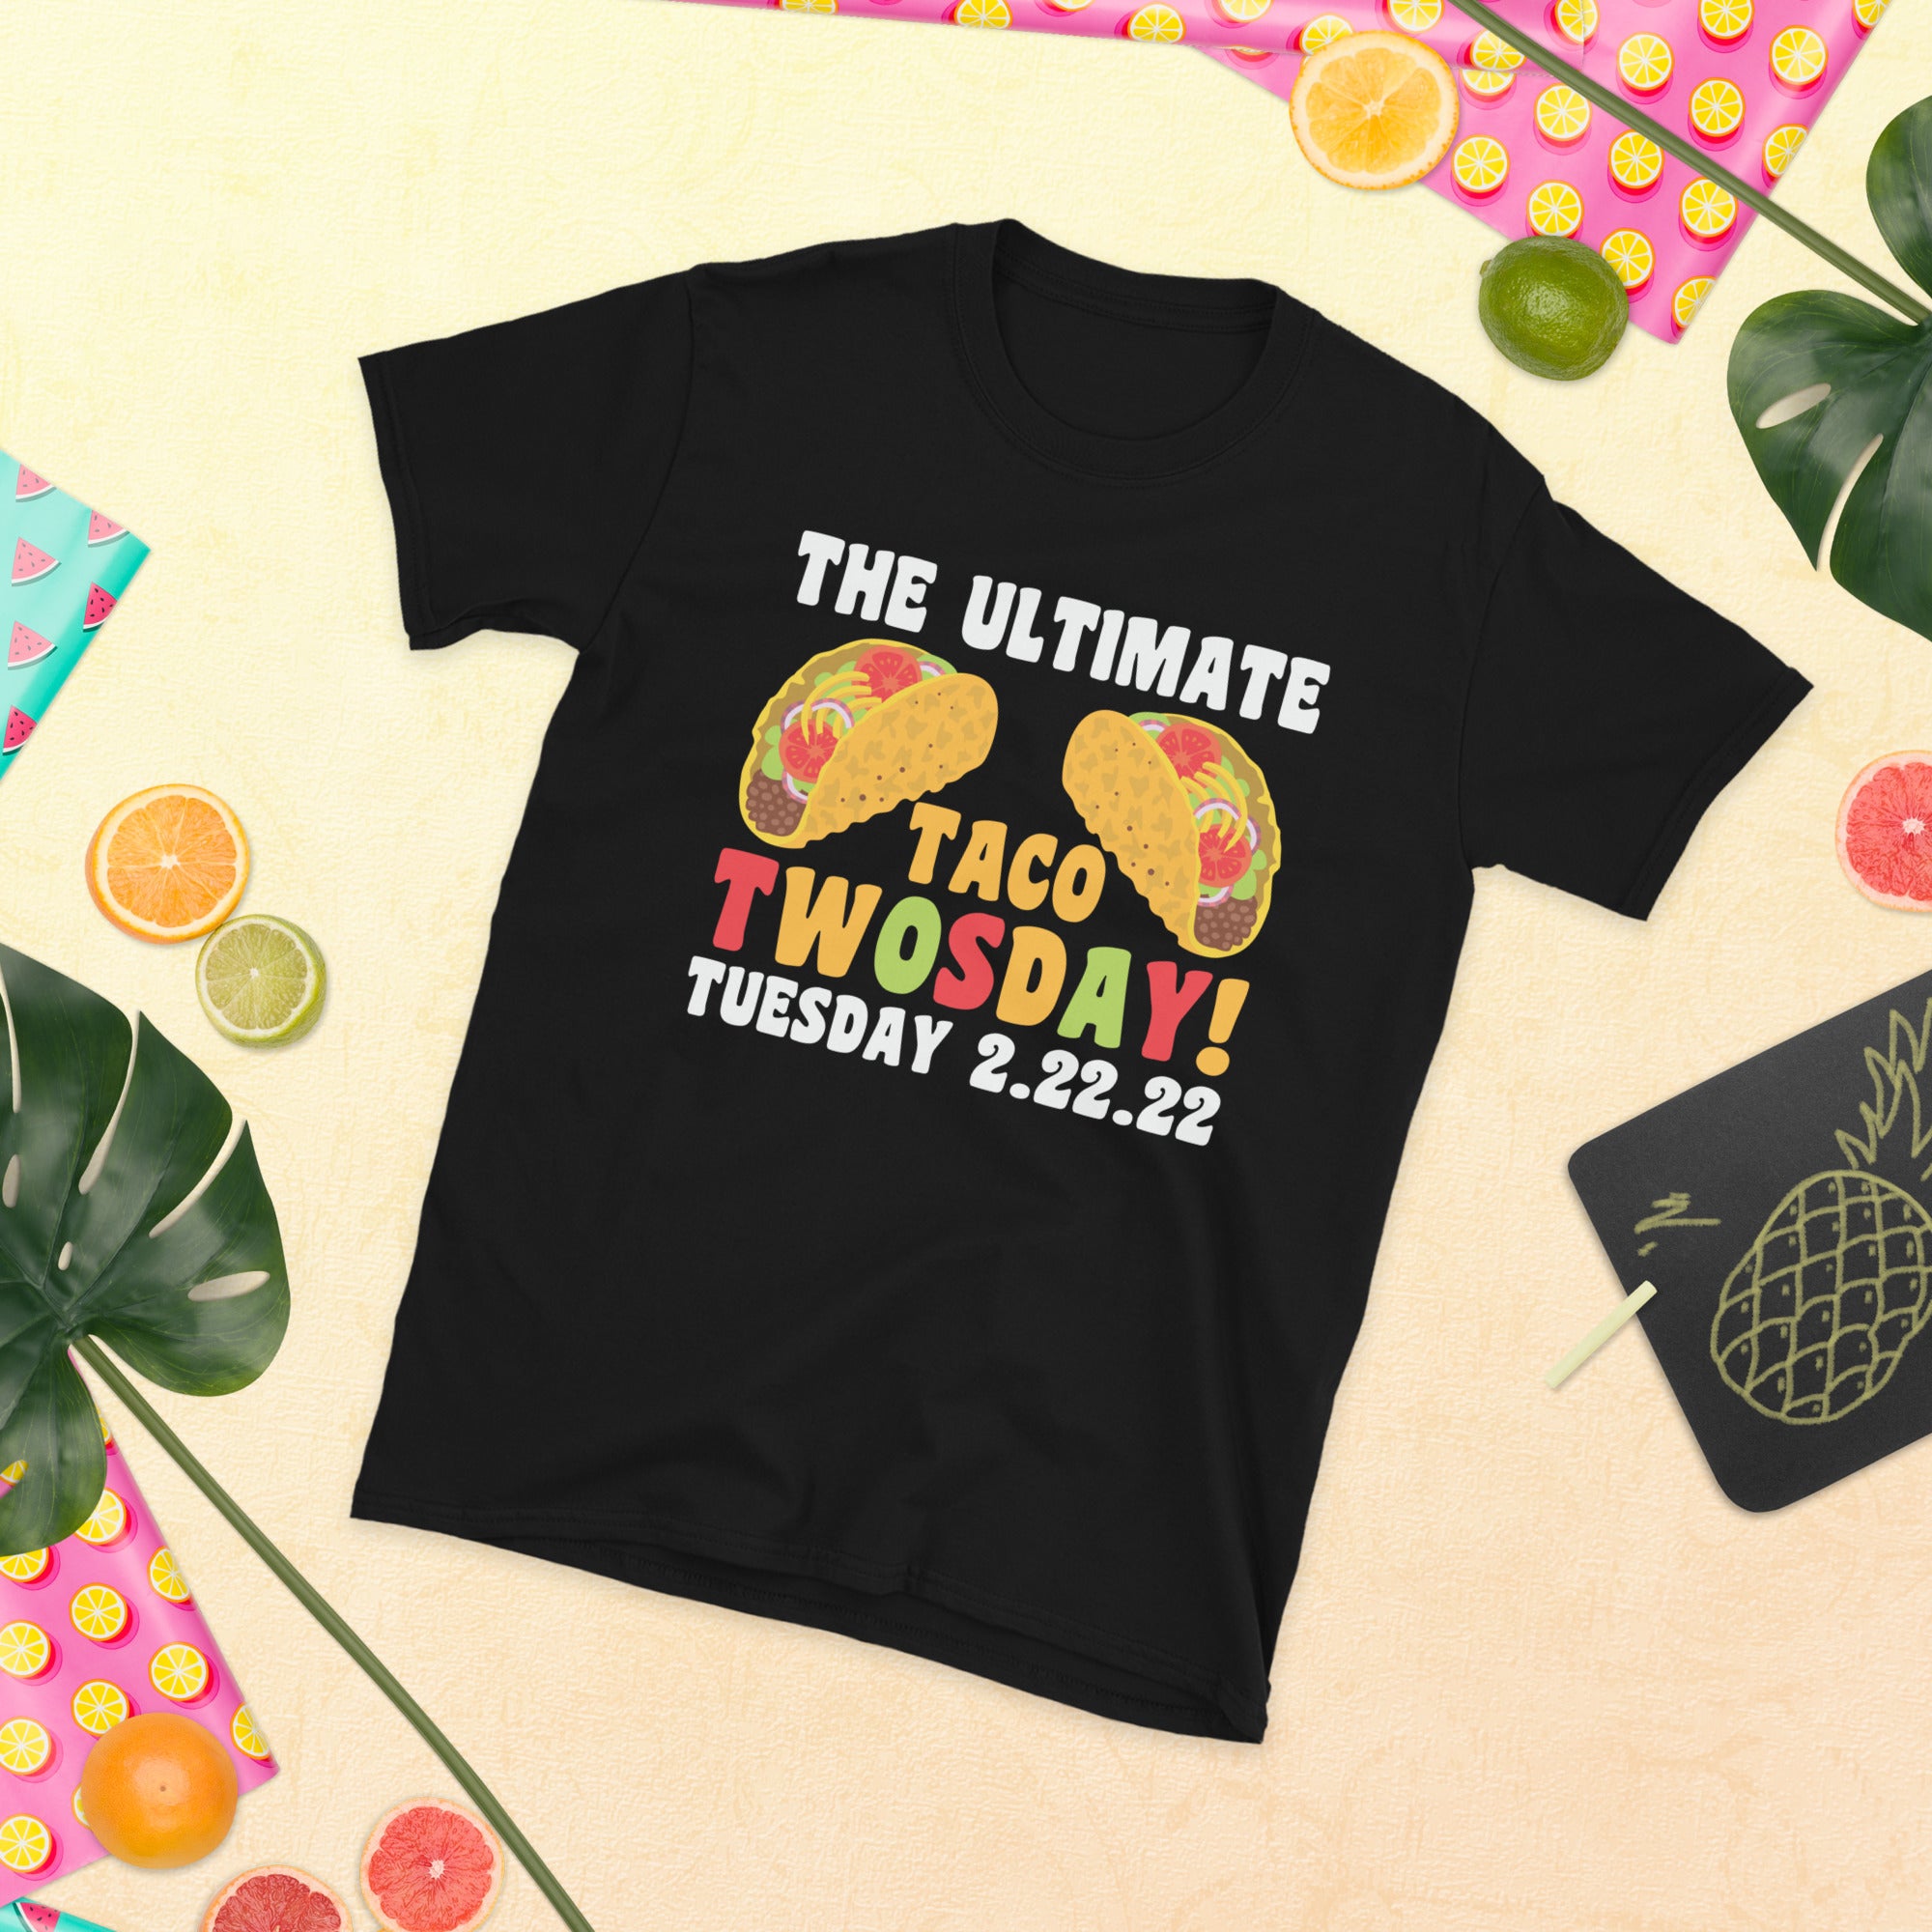 Taco Twosday Shirt, Tacos Lover Tshirt, Tuesday 2-22-22, Taco Tuesday Tee, The Ultimate Taco Twosday, February 22nd 2022, Funny Twosday Gift